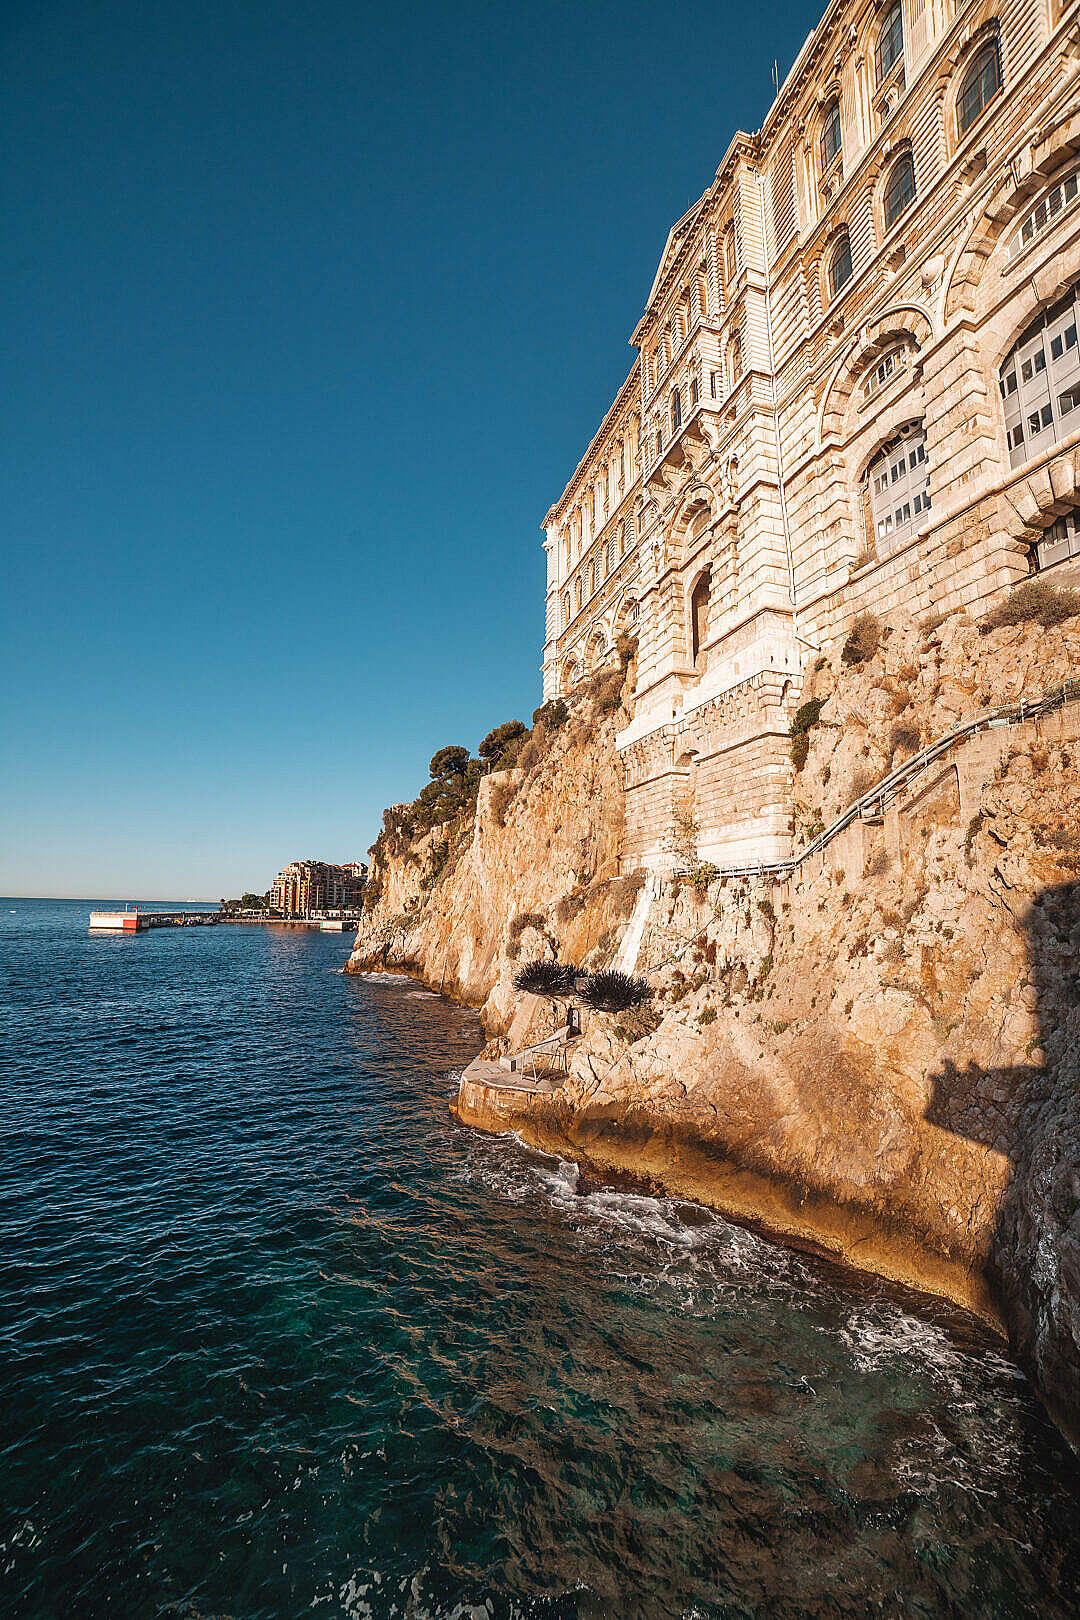 Download Monaco Oceanographic Museum with Artificial Sea Urchins FREE Stock Photo